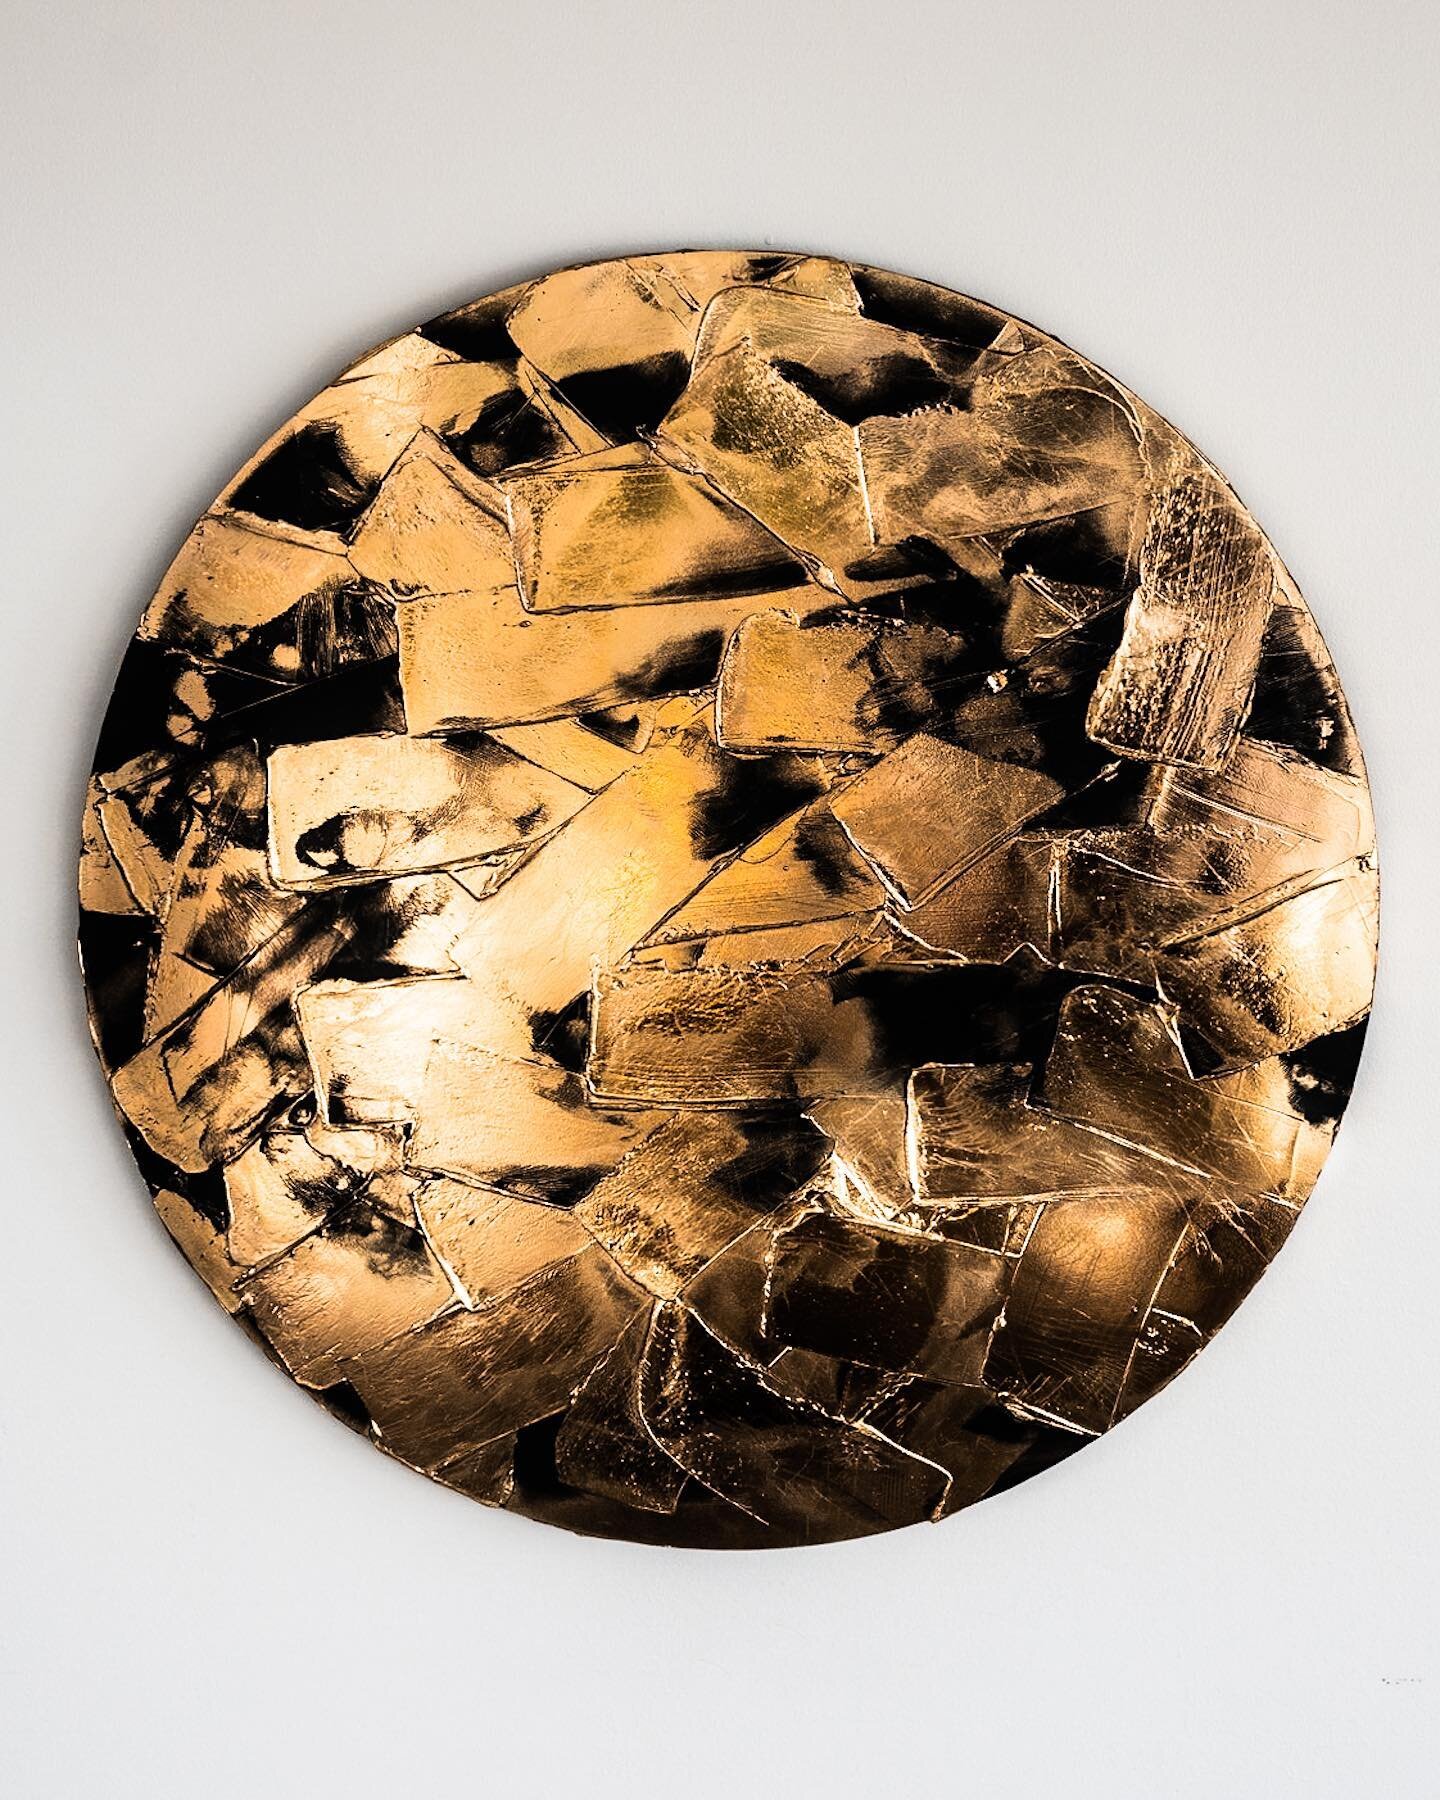 This piece was featured by Saatchi Art's Chief Curator, Rebecca Wilson, last week 🙌

(You might have also seen it IRL last weekend at Art Palm Beach 😁)

Possibilities
Gold foil on panel
28-inch diameter